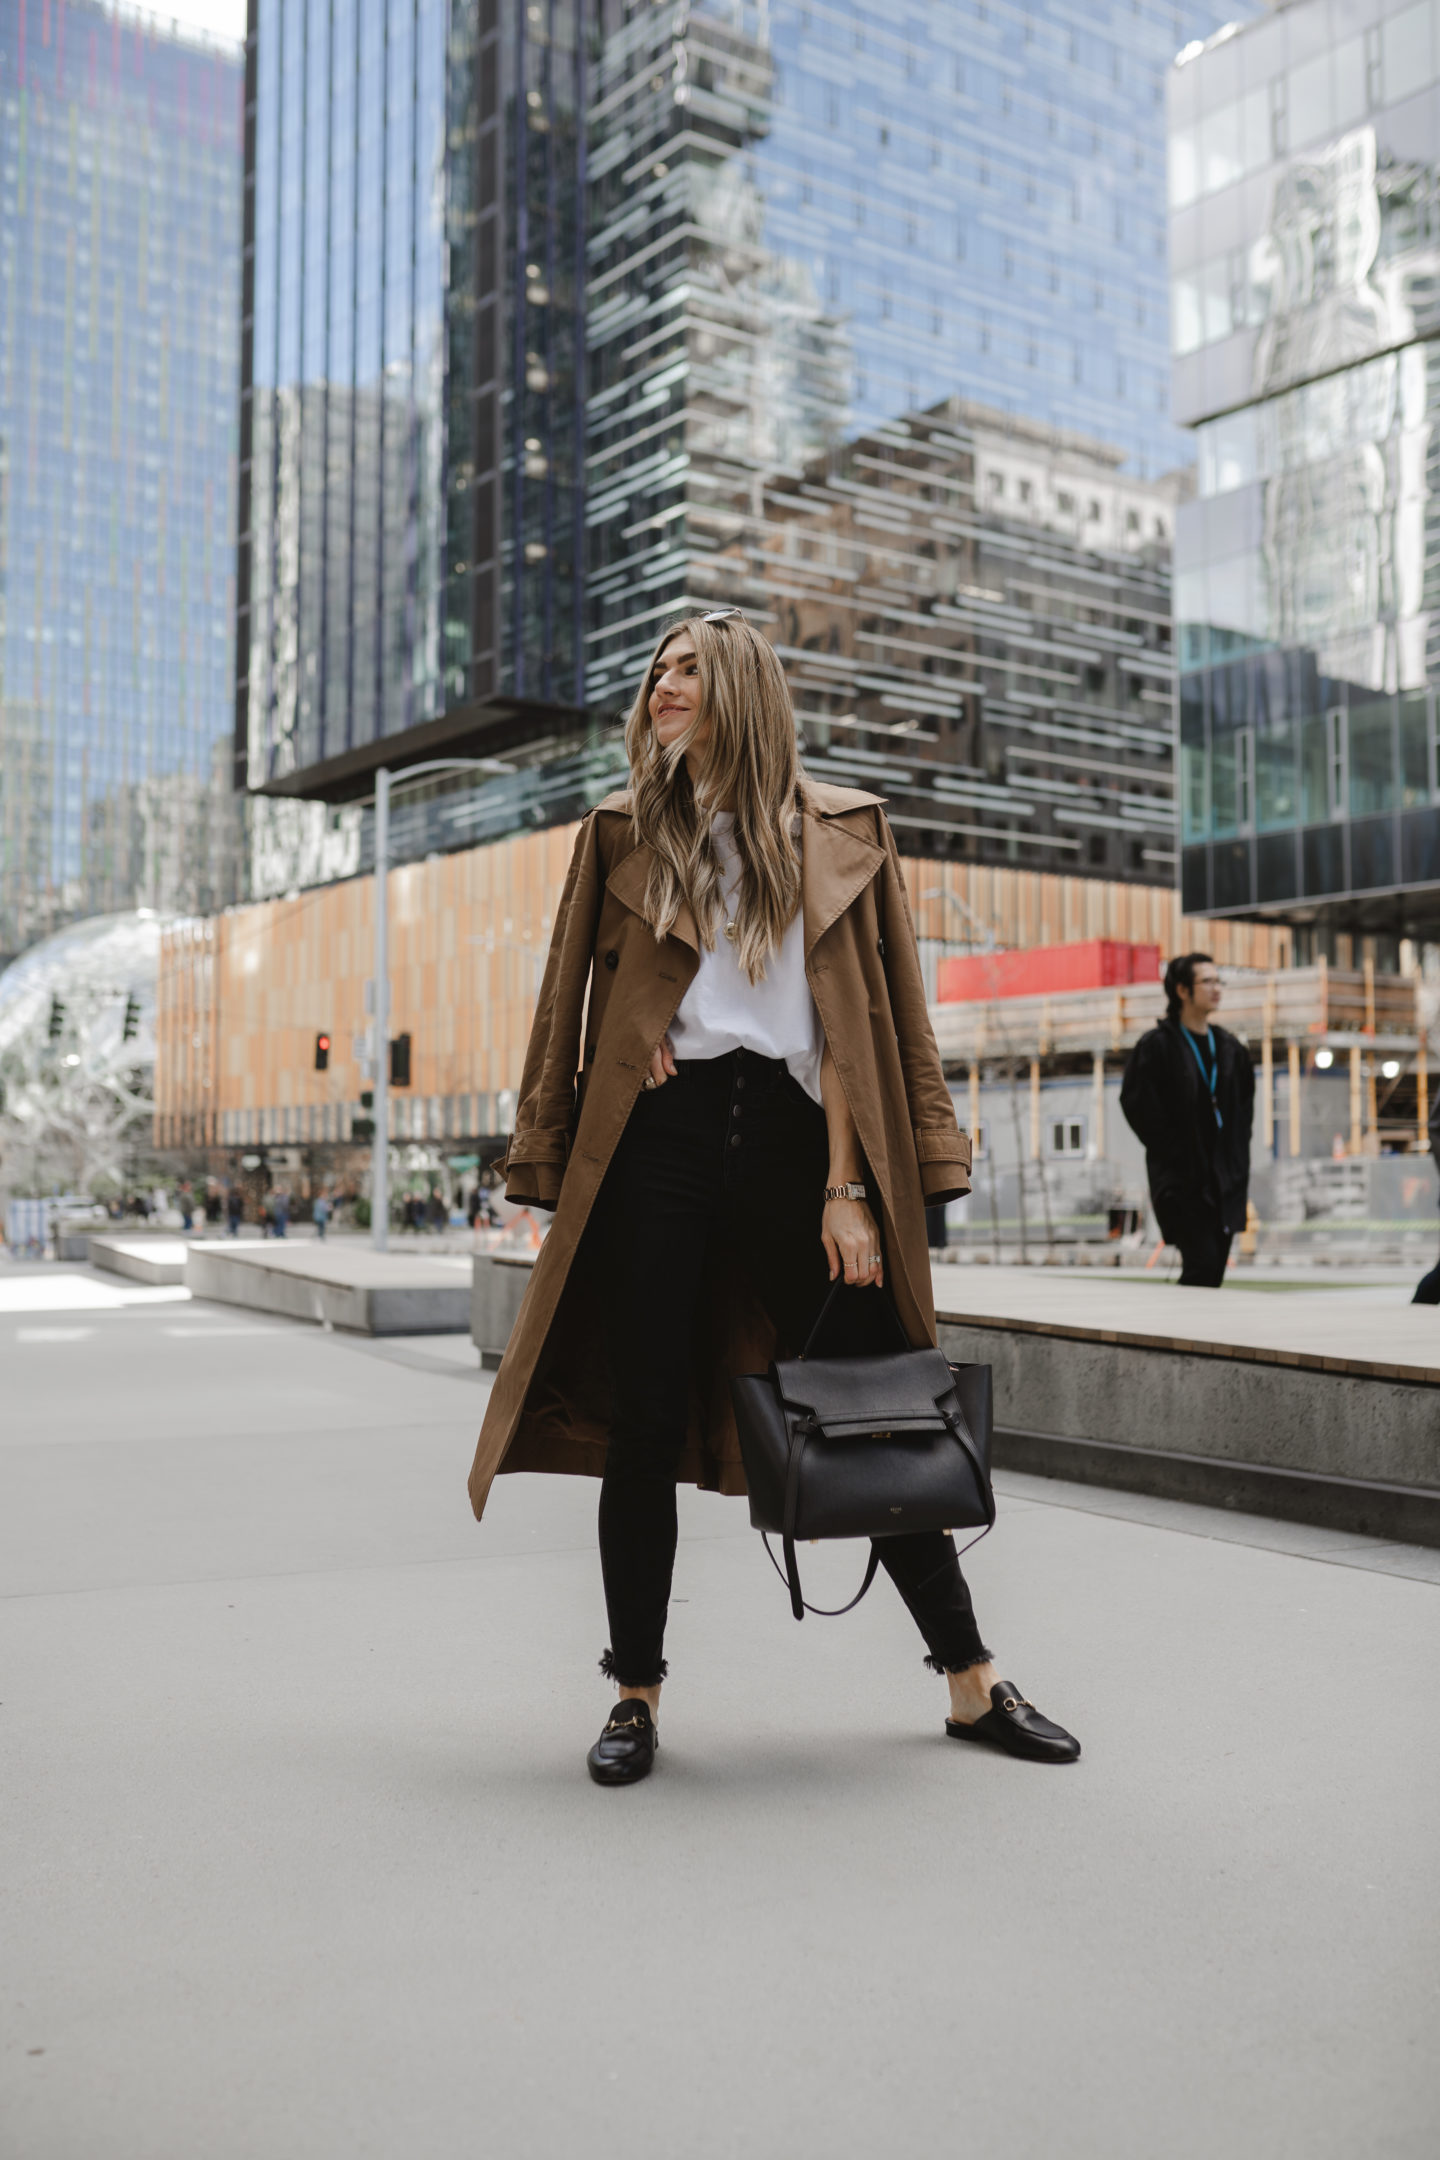 The Grey Edit - Cortney Bigelow - Seattle Blogger - Casual Style - The Frankie Shop Shoulder Padded Muscle Tee - South Lake Union - Trench Coat